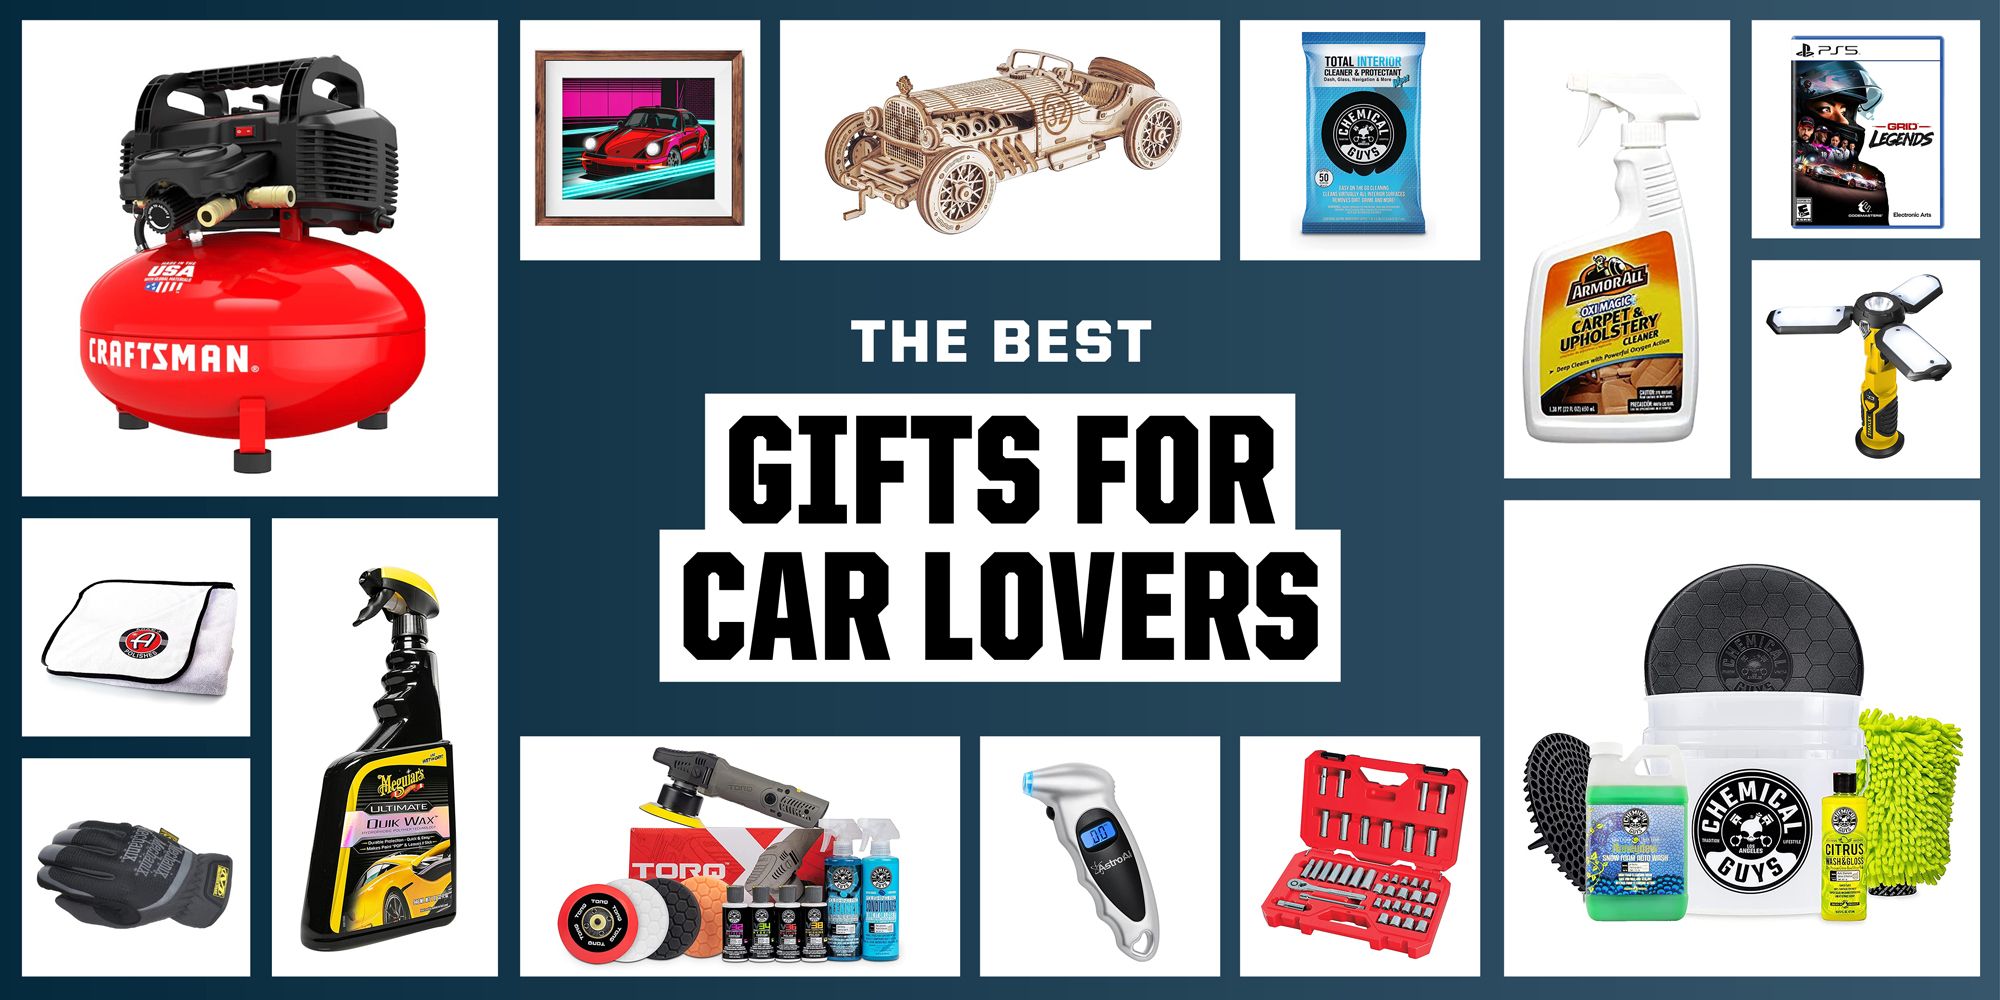 10 Cool Car-Related Gift Ideas - AmongMen